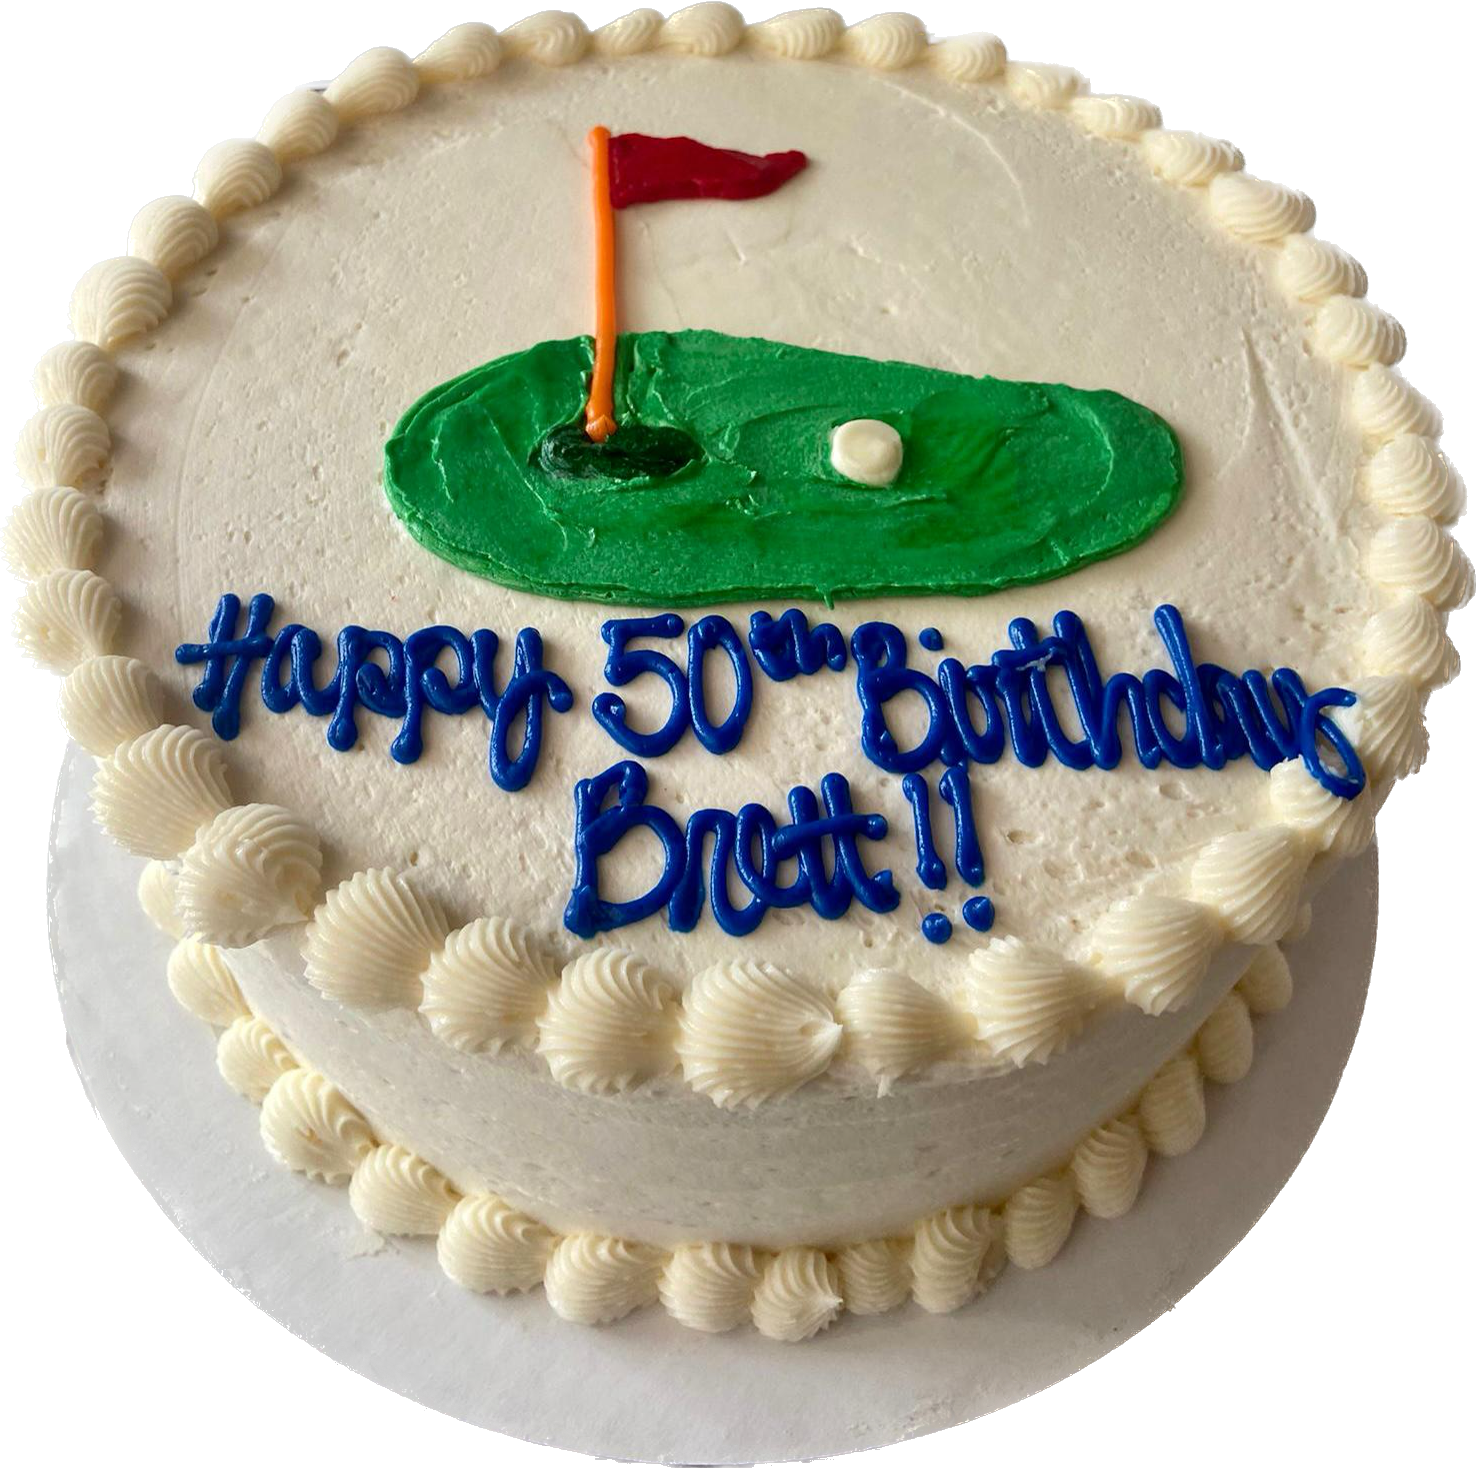 Tried my hand at a golf-themed cake for my boyfriend's birthday and it  turned out better than expected! : r/Baking